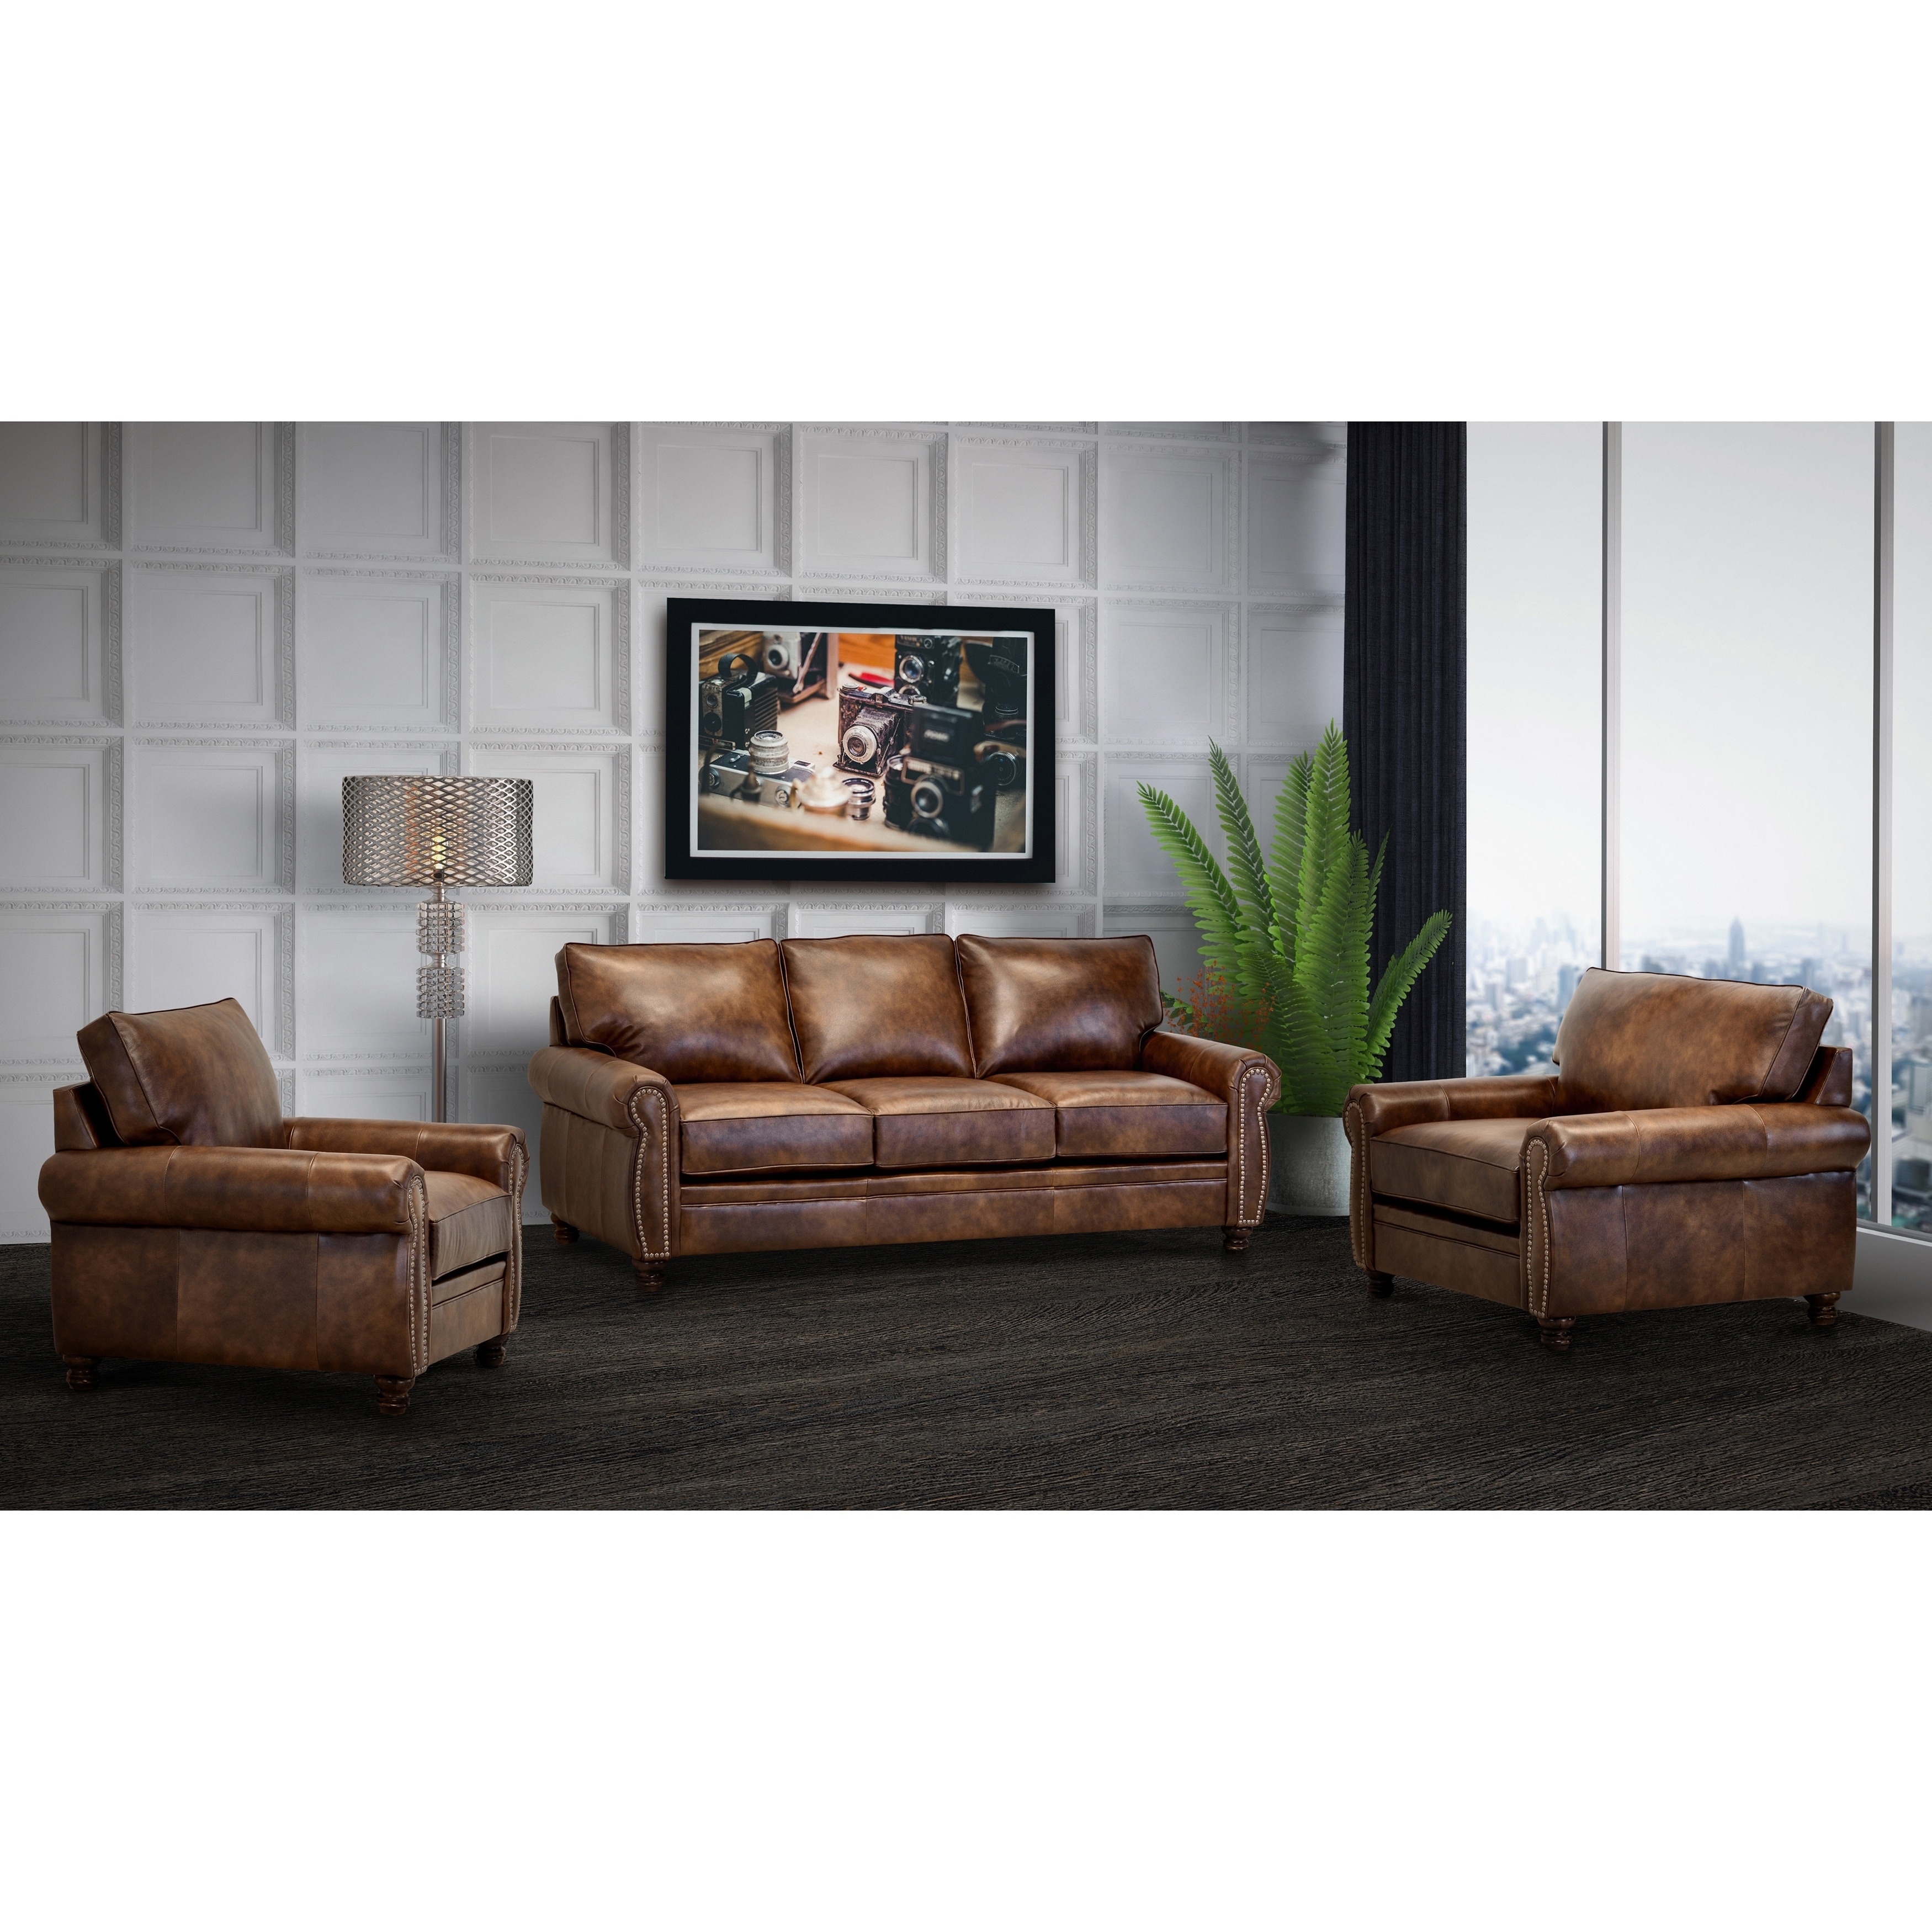 Cabot Brown Top Grain Leather Sofa And 2 Chair Set On Sale